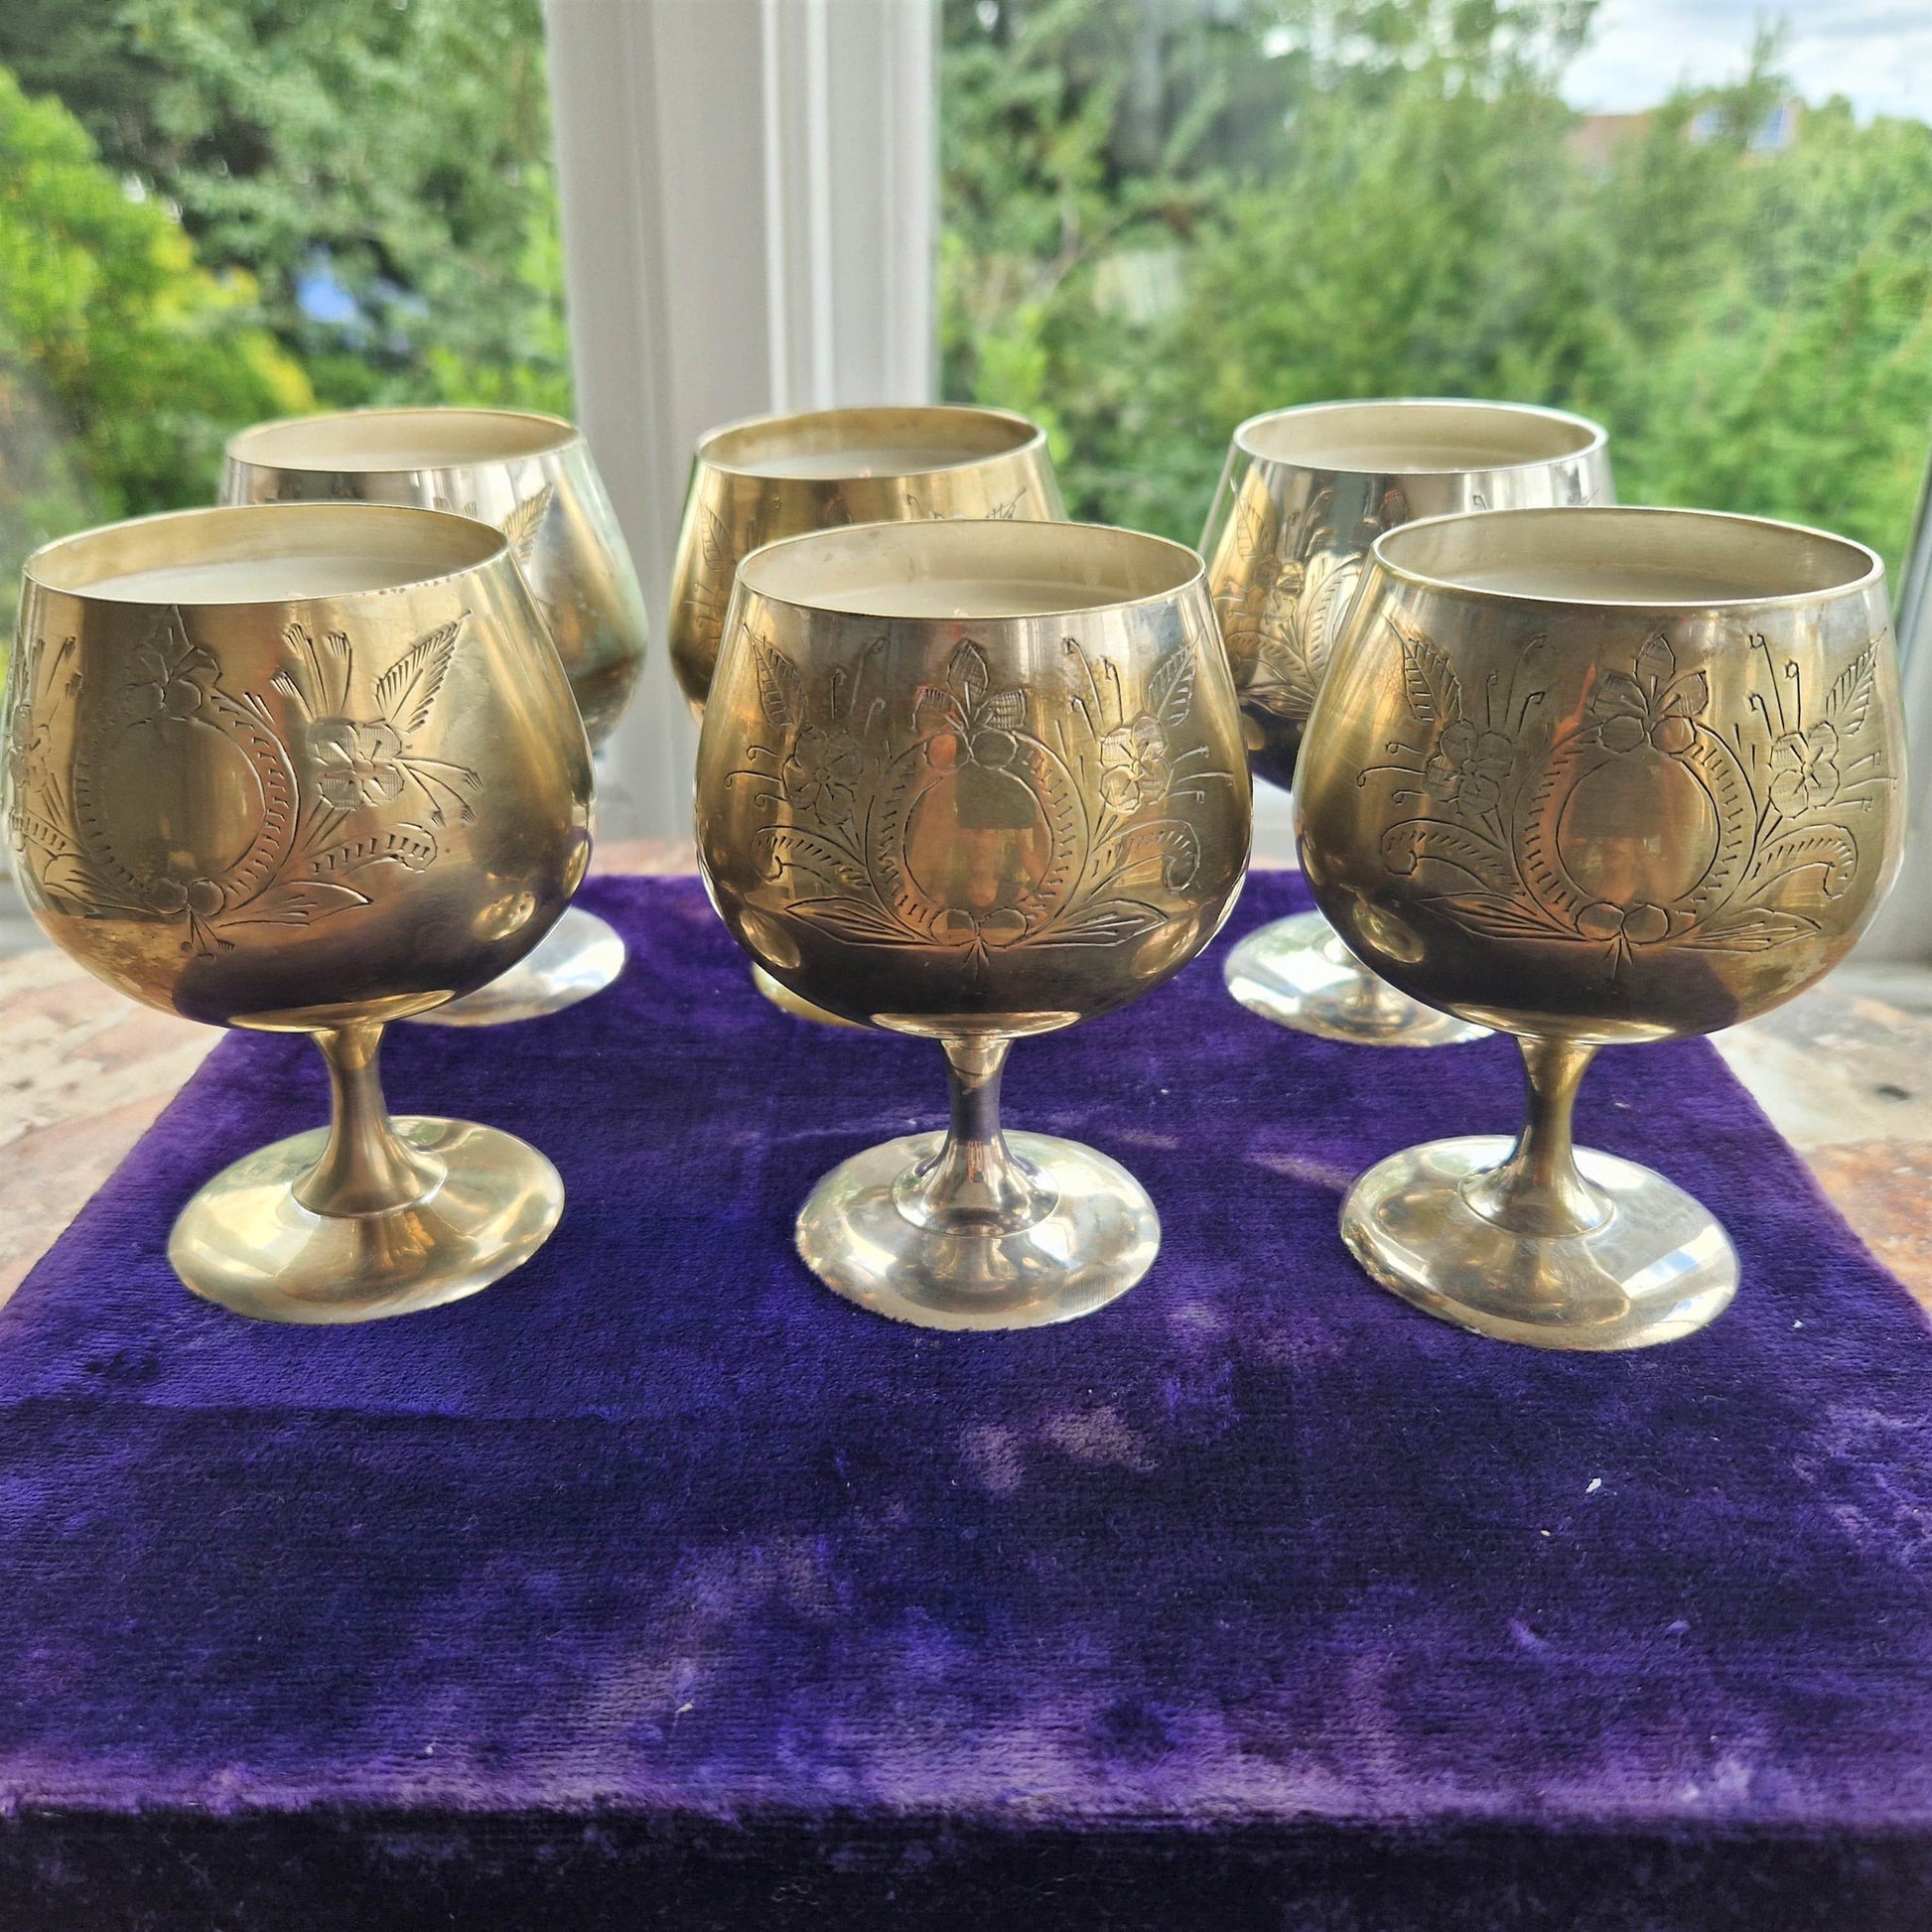 Bestsellers candle collection in large engraved goblets 